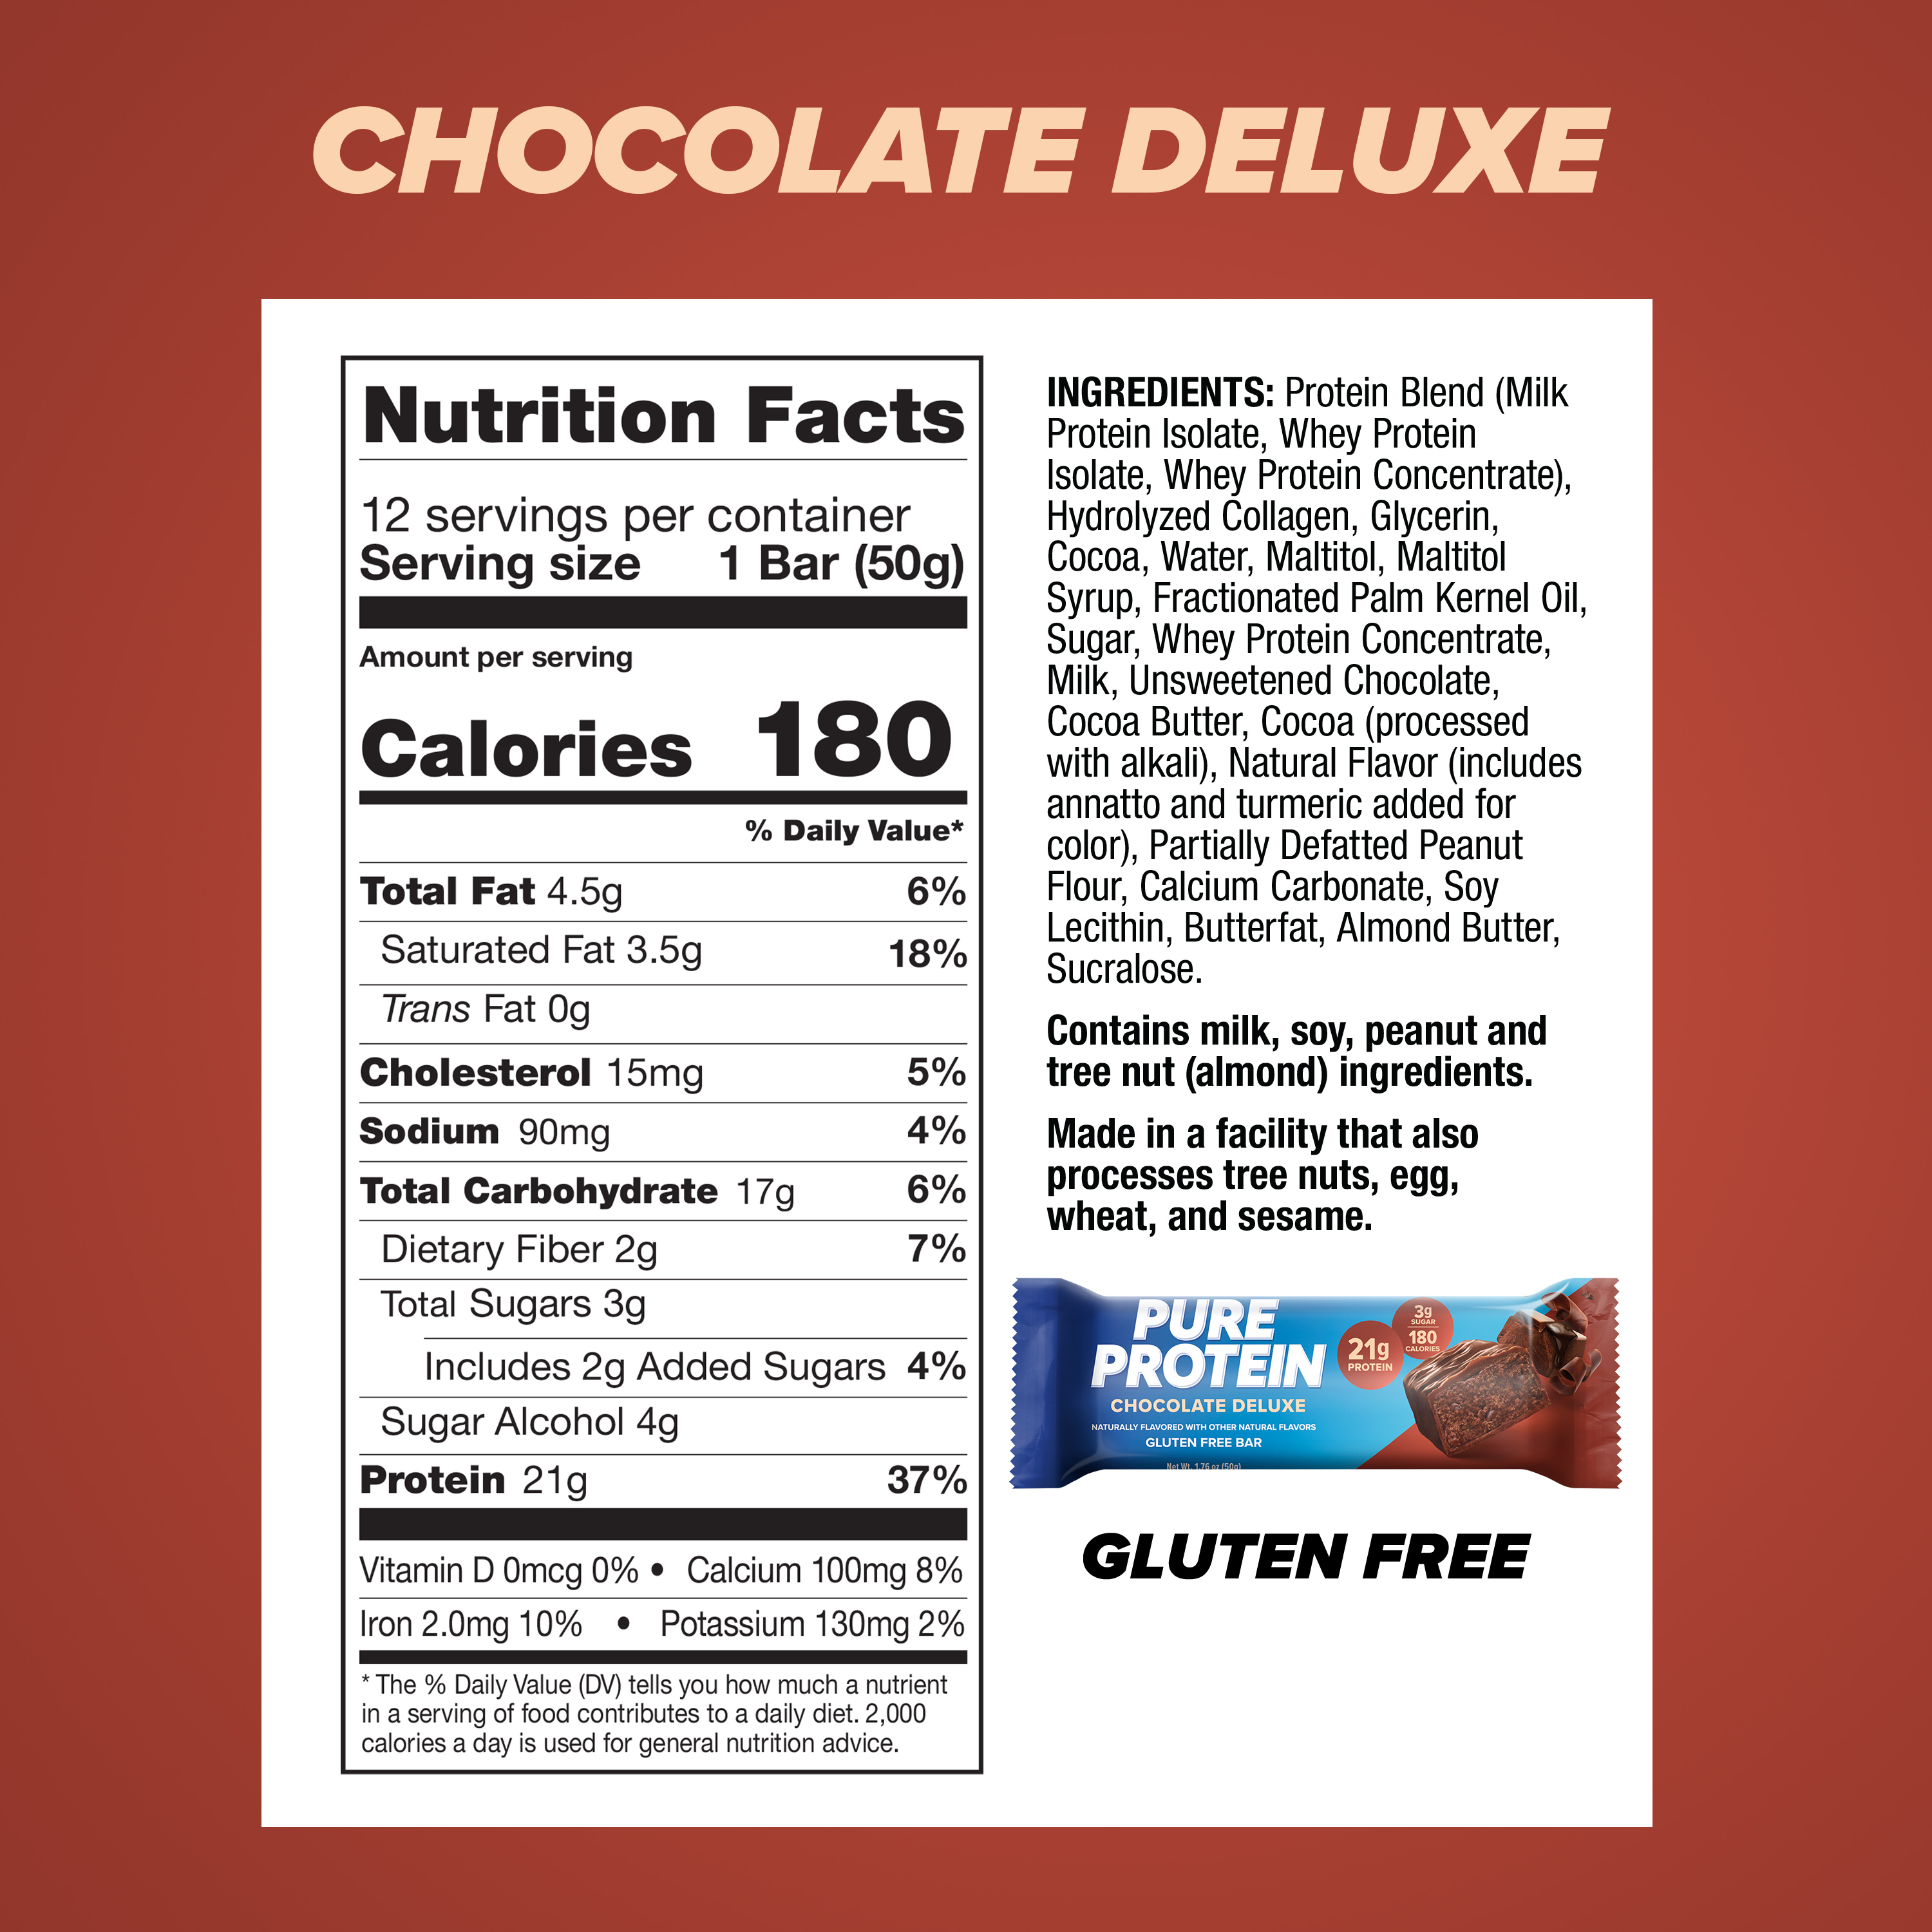 Pure Protein Bar, Chocolate Deluxe, 21g Protein, Gluten Free, 1.76 oz, 12 Ct - image 3 of 3